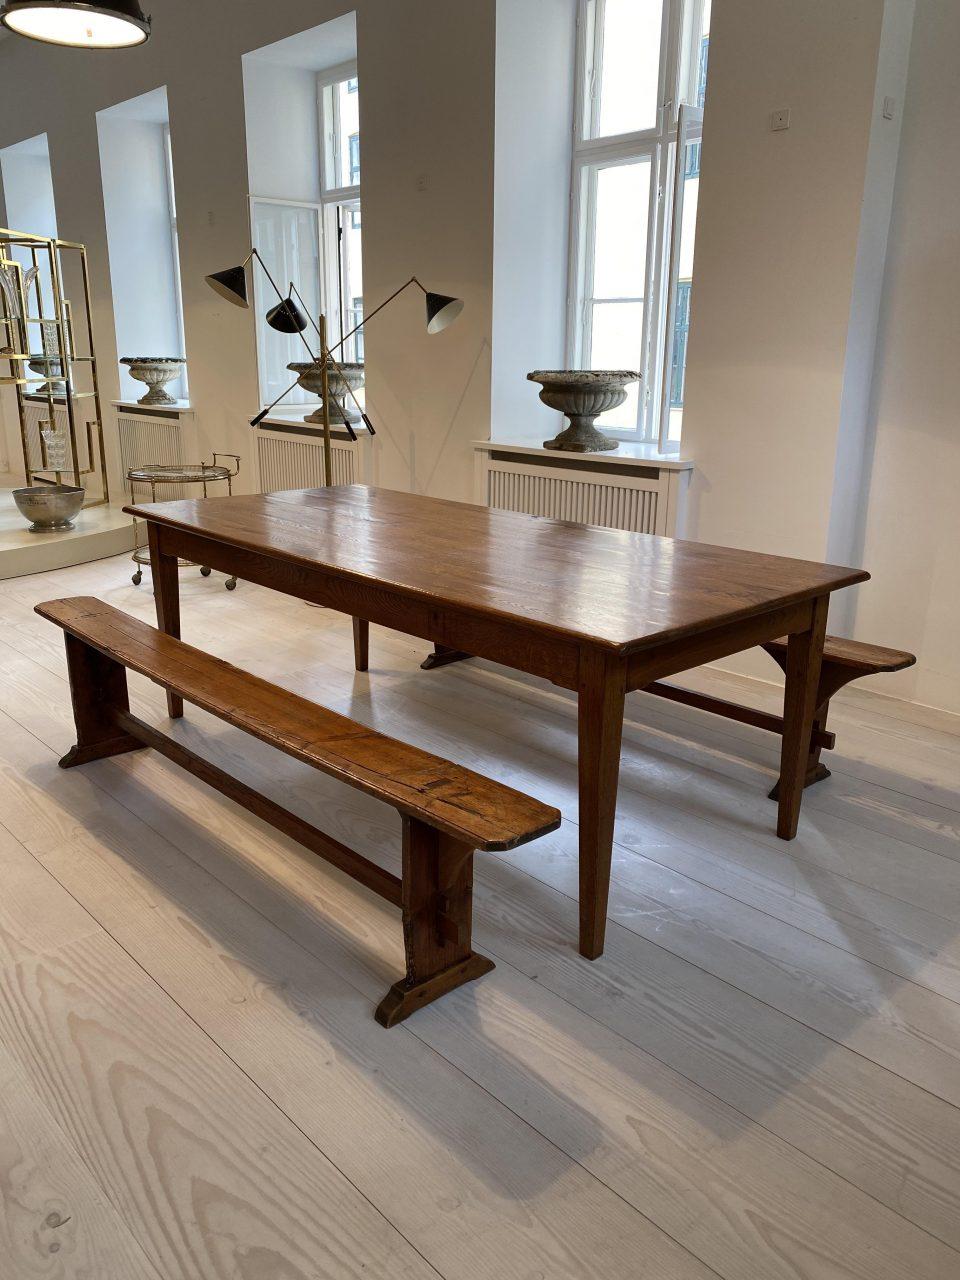 Handsome and good quality vintage long table from southern France. The table features a beautiful quality dark waxed table top that rests steadily on 4 tapered legs. Two narrow and elegant wooden benches in the same style are included in the set,